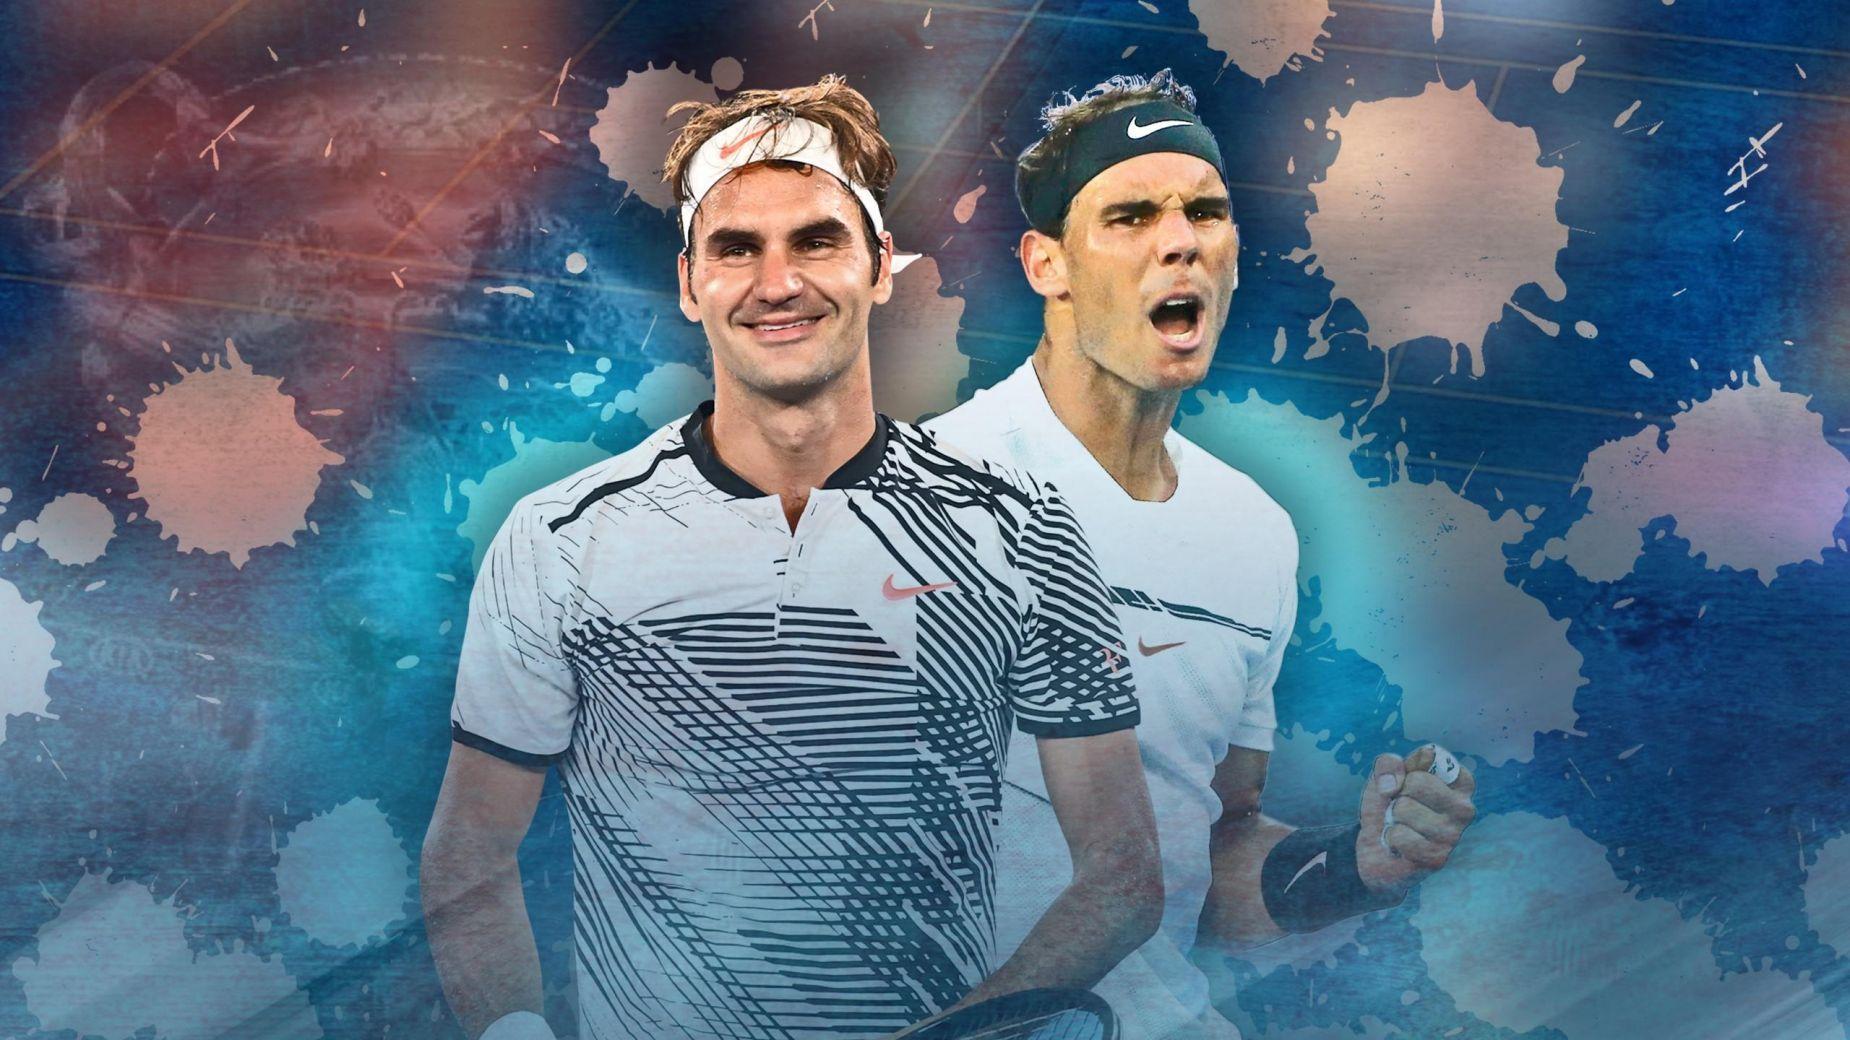 Best of enemies: Federer, Nadal and the greatest rivalry in sport